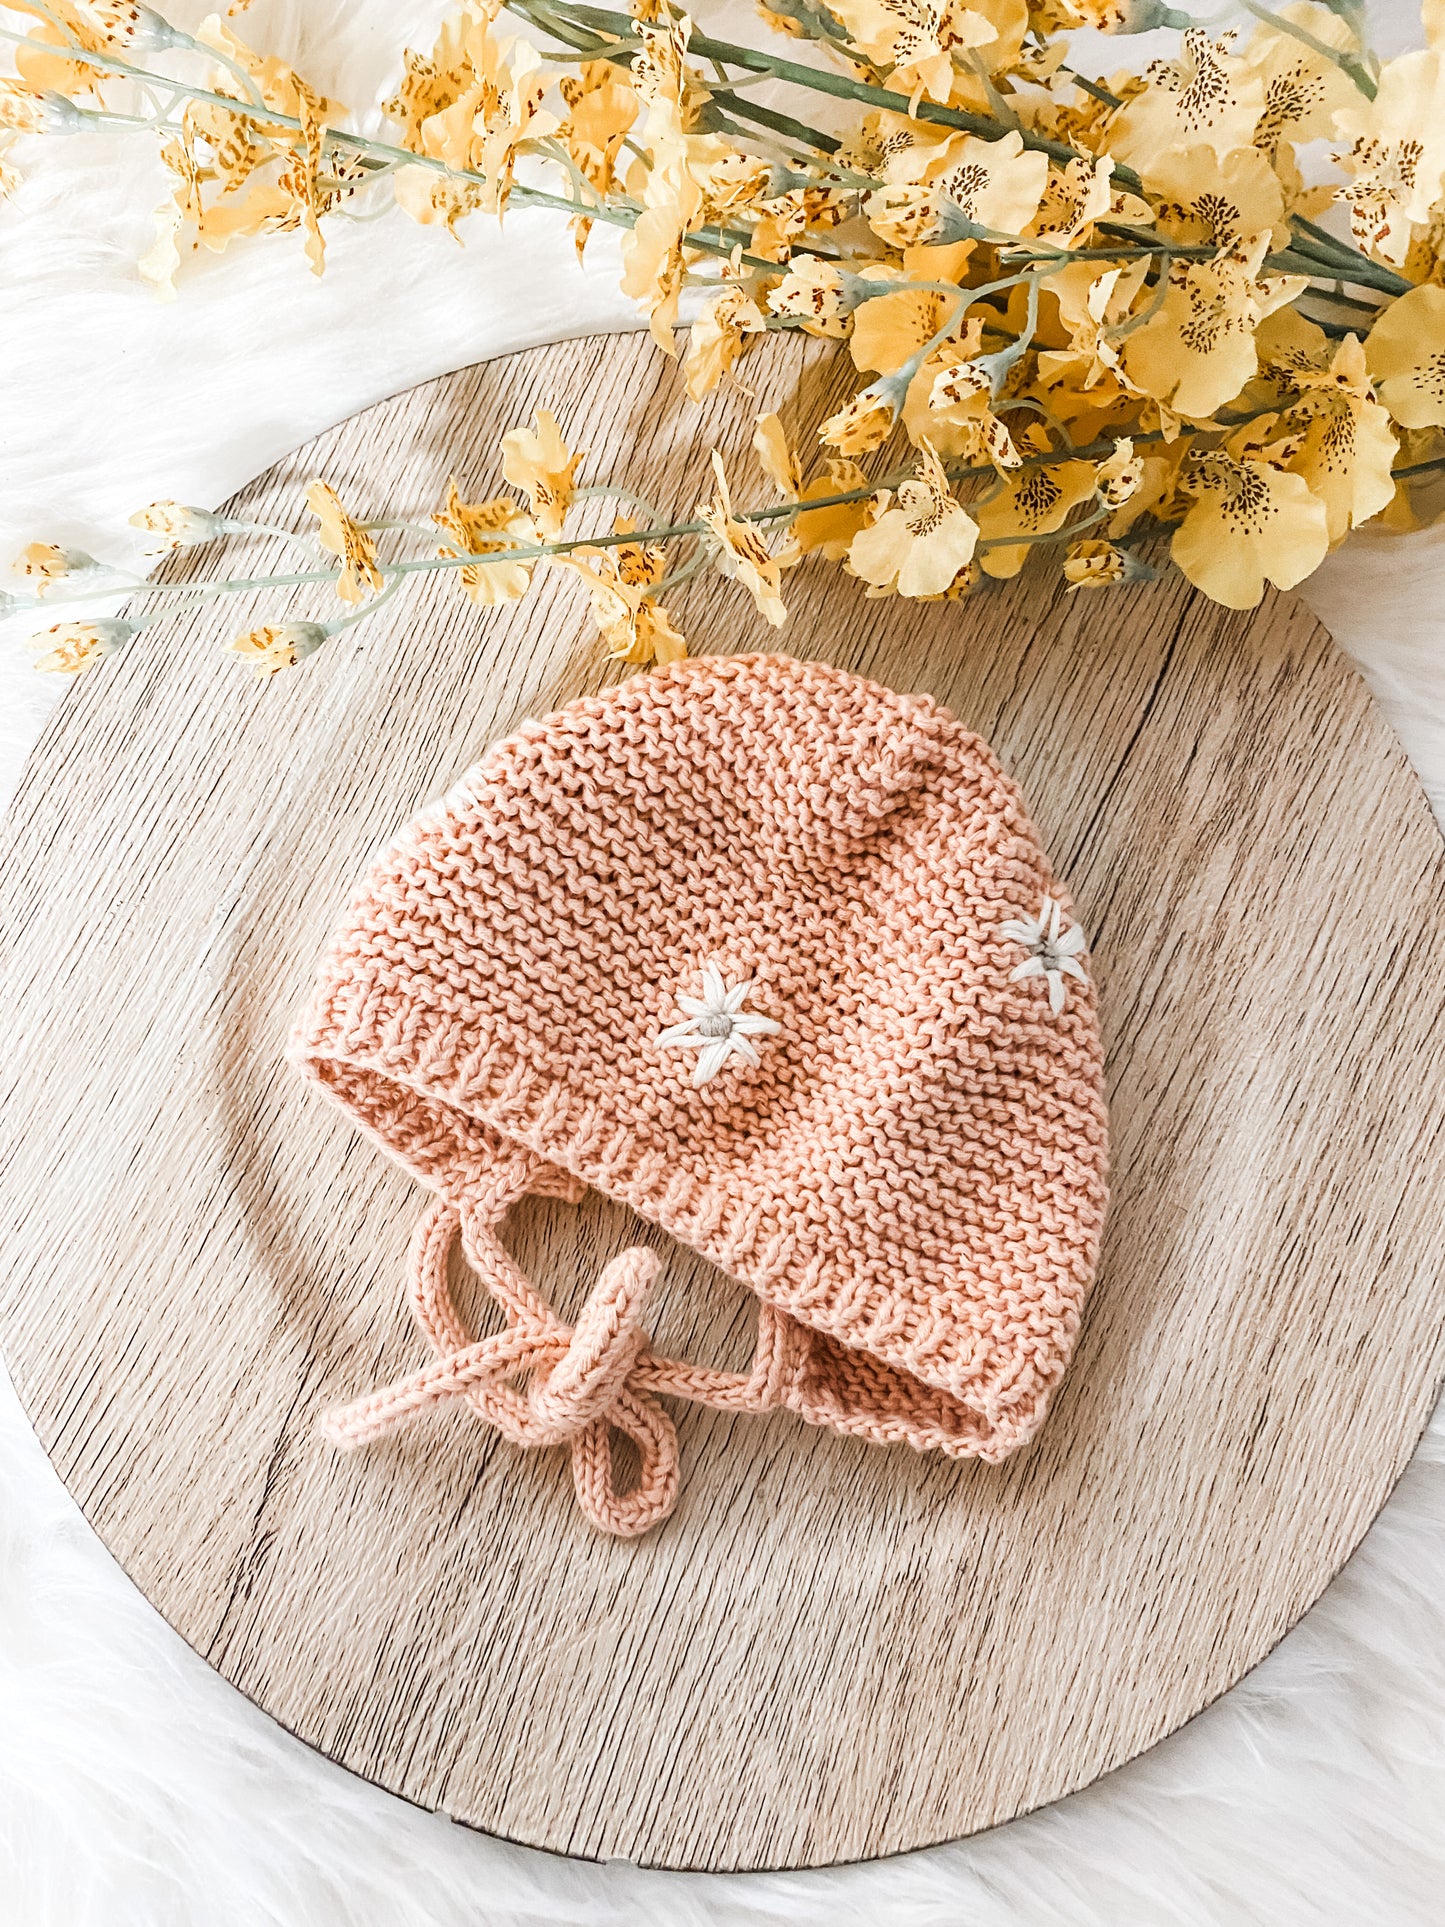 Knitted Bonnet for Baby Girl with Hand Embroidered Flowers, Newborn Photo Prop, Spring Baby Accessories